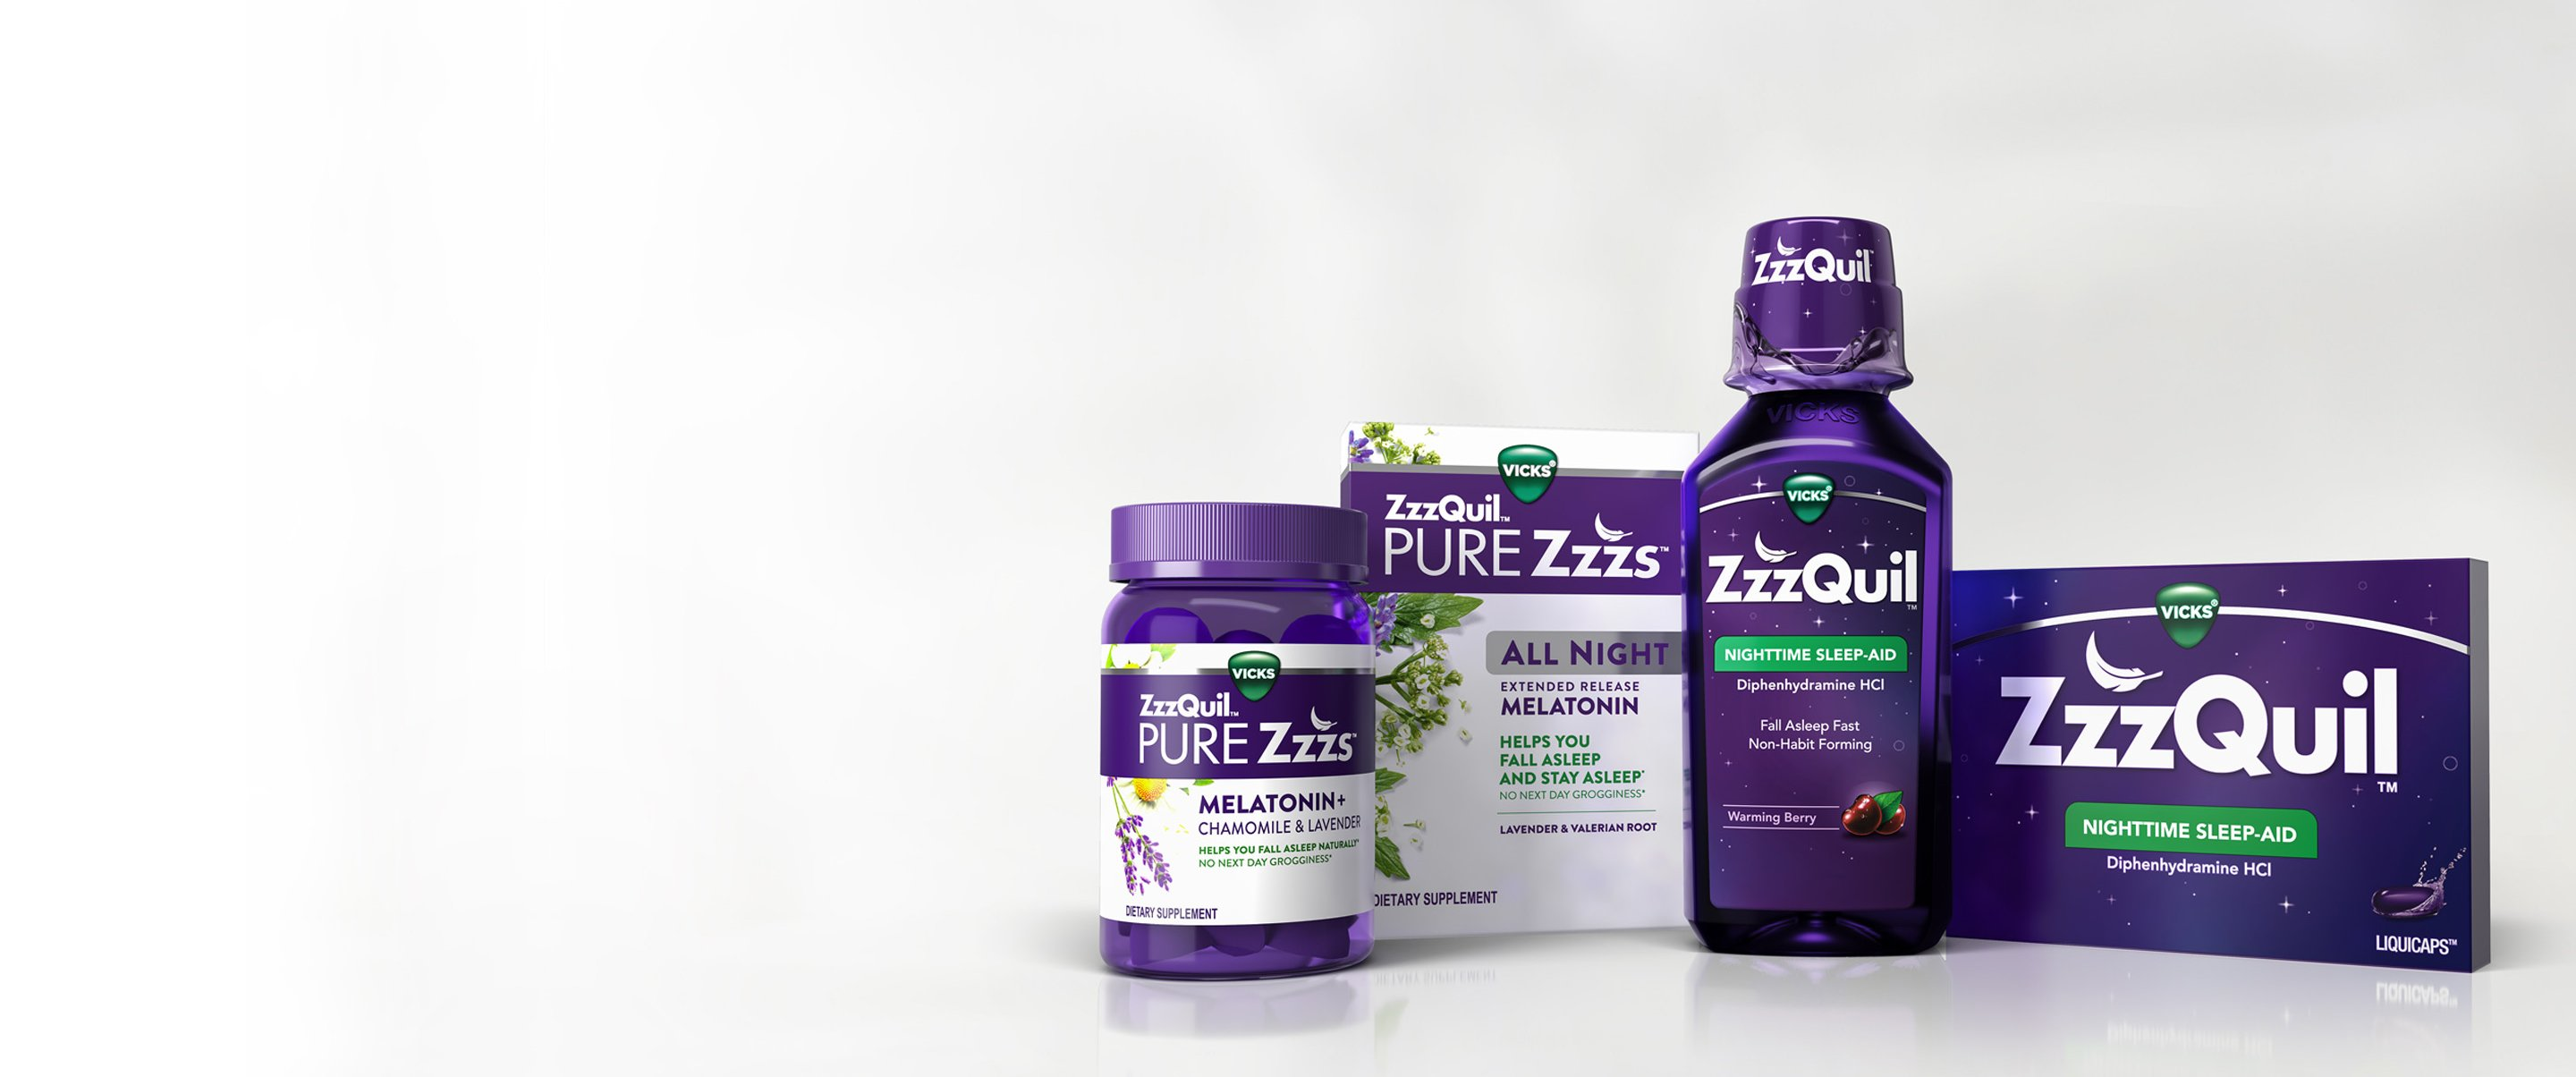 ZzzQuil and PureZzzs - leading sleep aid supplement brand 